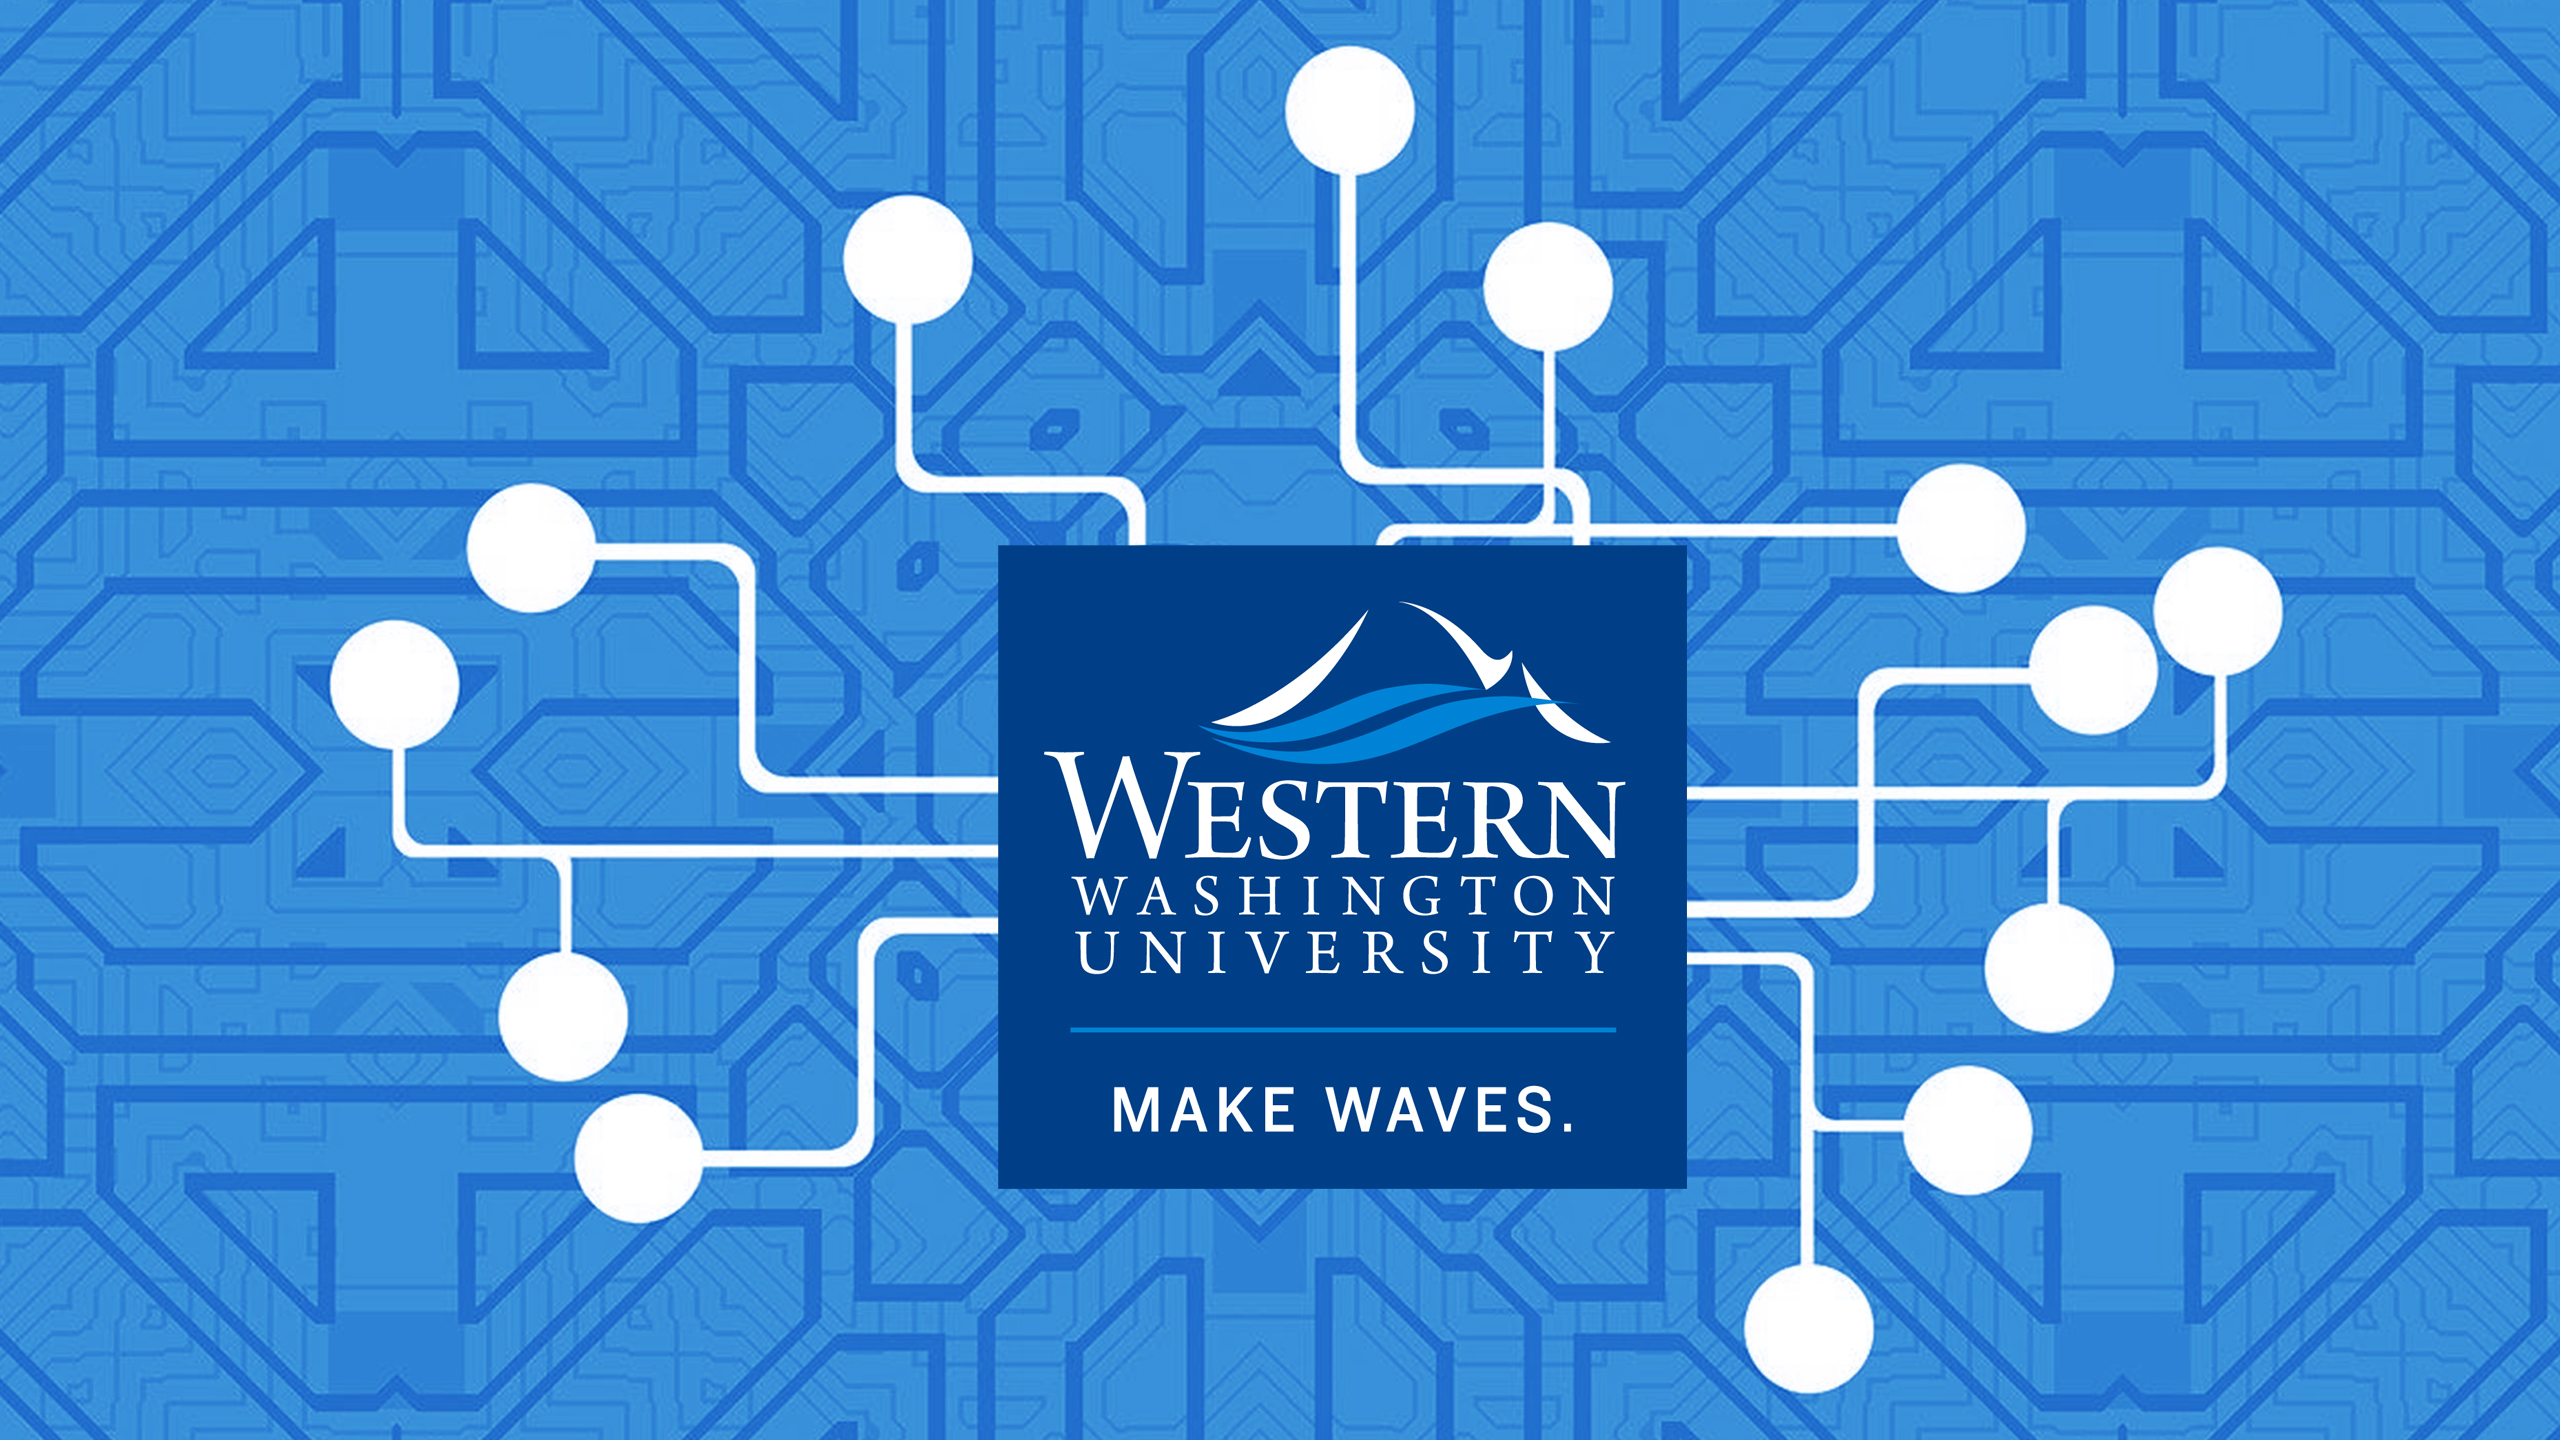 Lines sprouting out in various directions from the Western logo over a geometric background pattern reminiscent of a circuit board